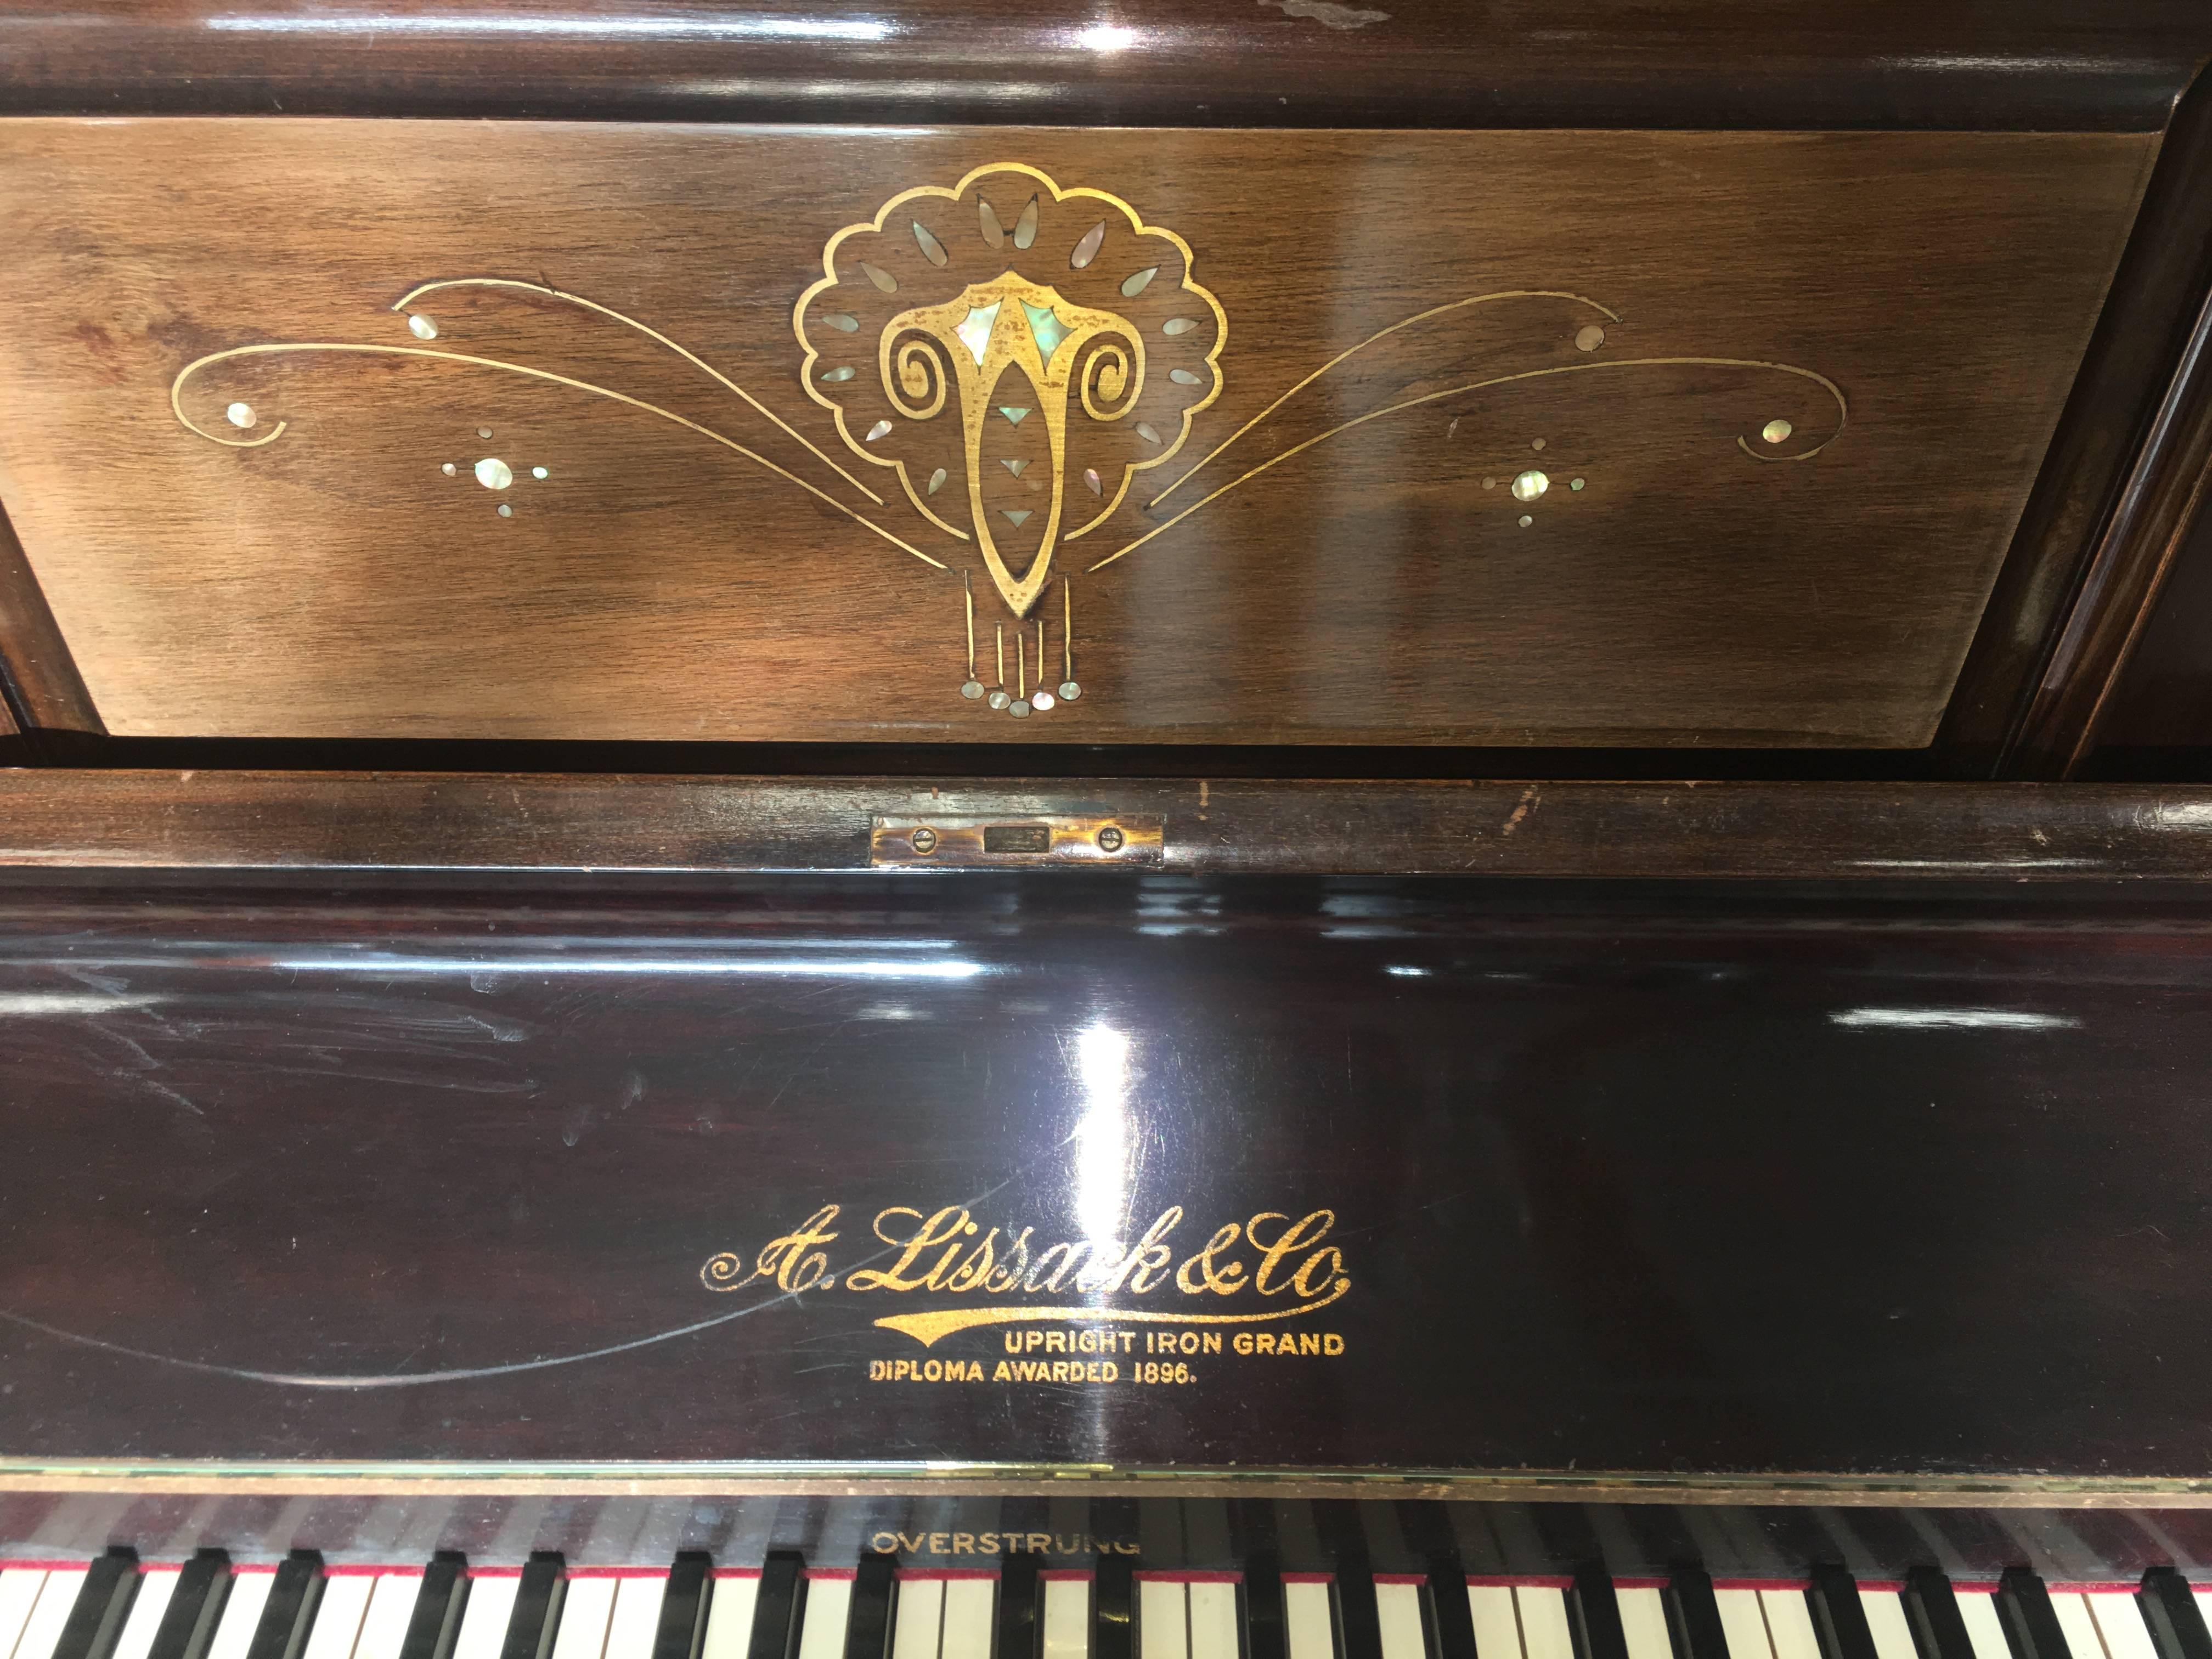 Beautiful Lissack & Co piano
Beginning of '900, rosewood , metal chassis, mother-of-pearl decorations
1896 Lissack & Co upright iron gand diploma awarded piano. 

Chair 
50 / 36 diam.
            